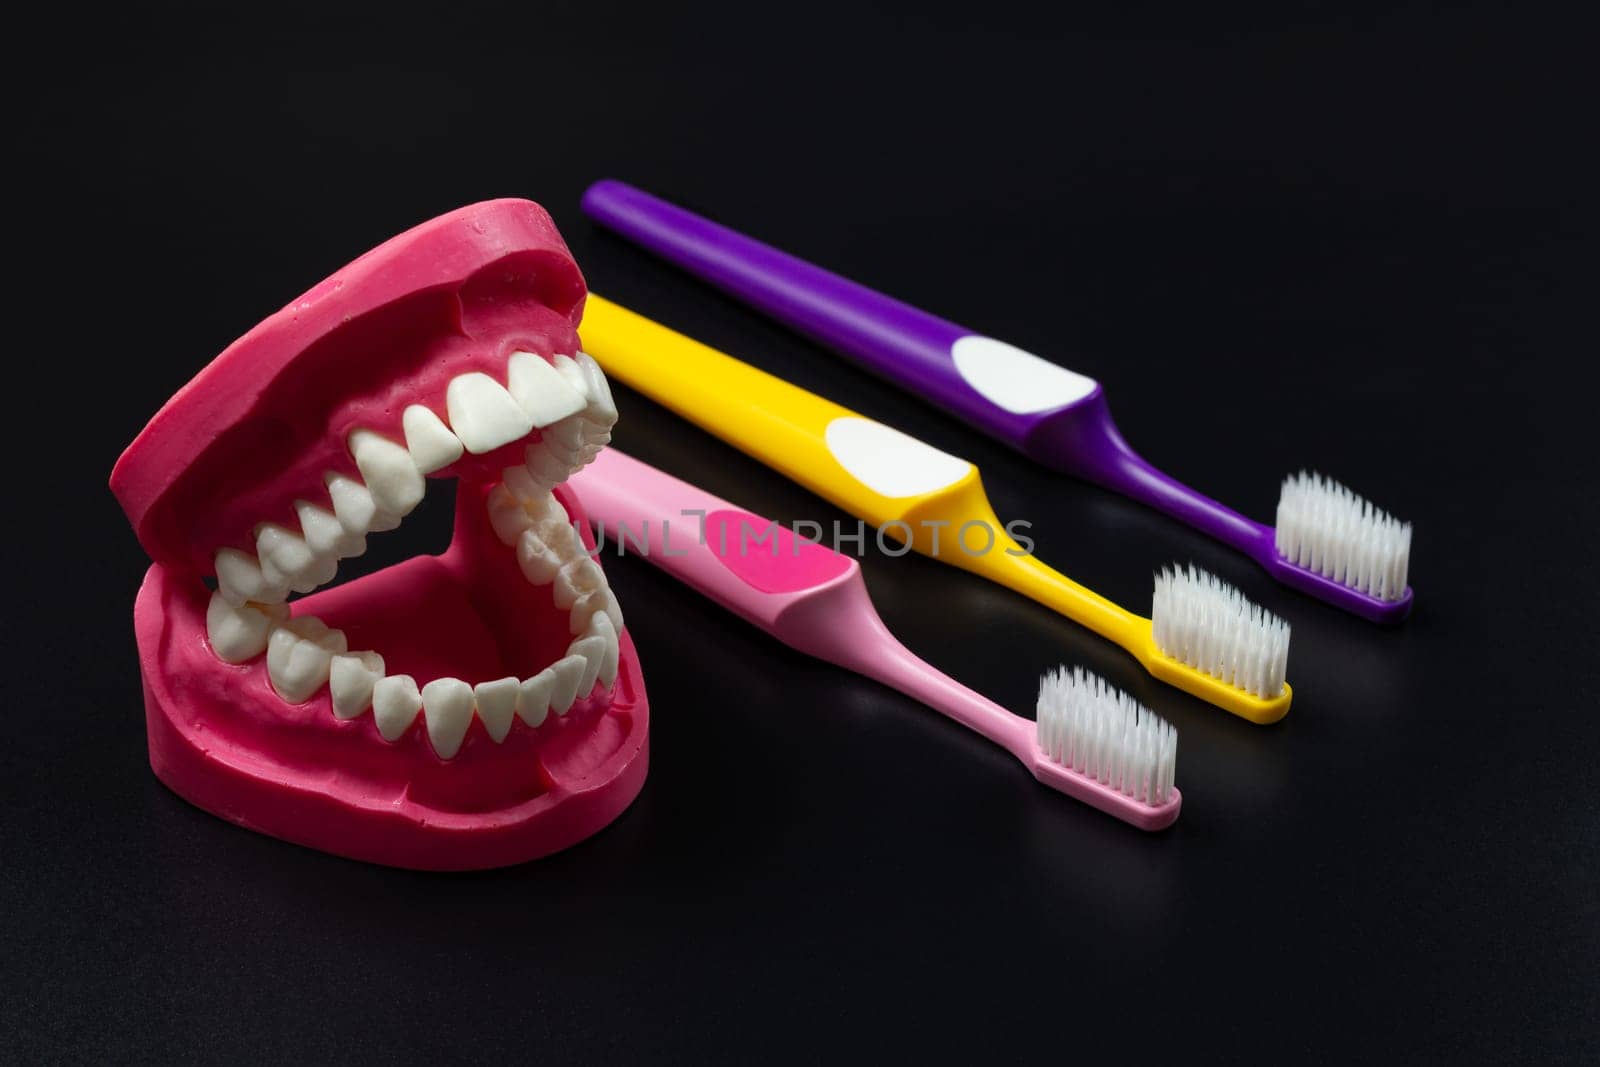 Toothbrushes and layout of the human jaw on the black background. by mvg6894